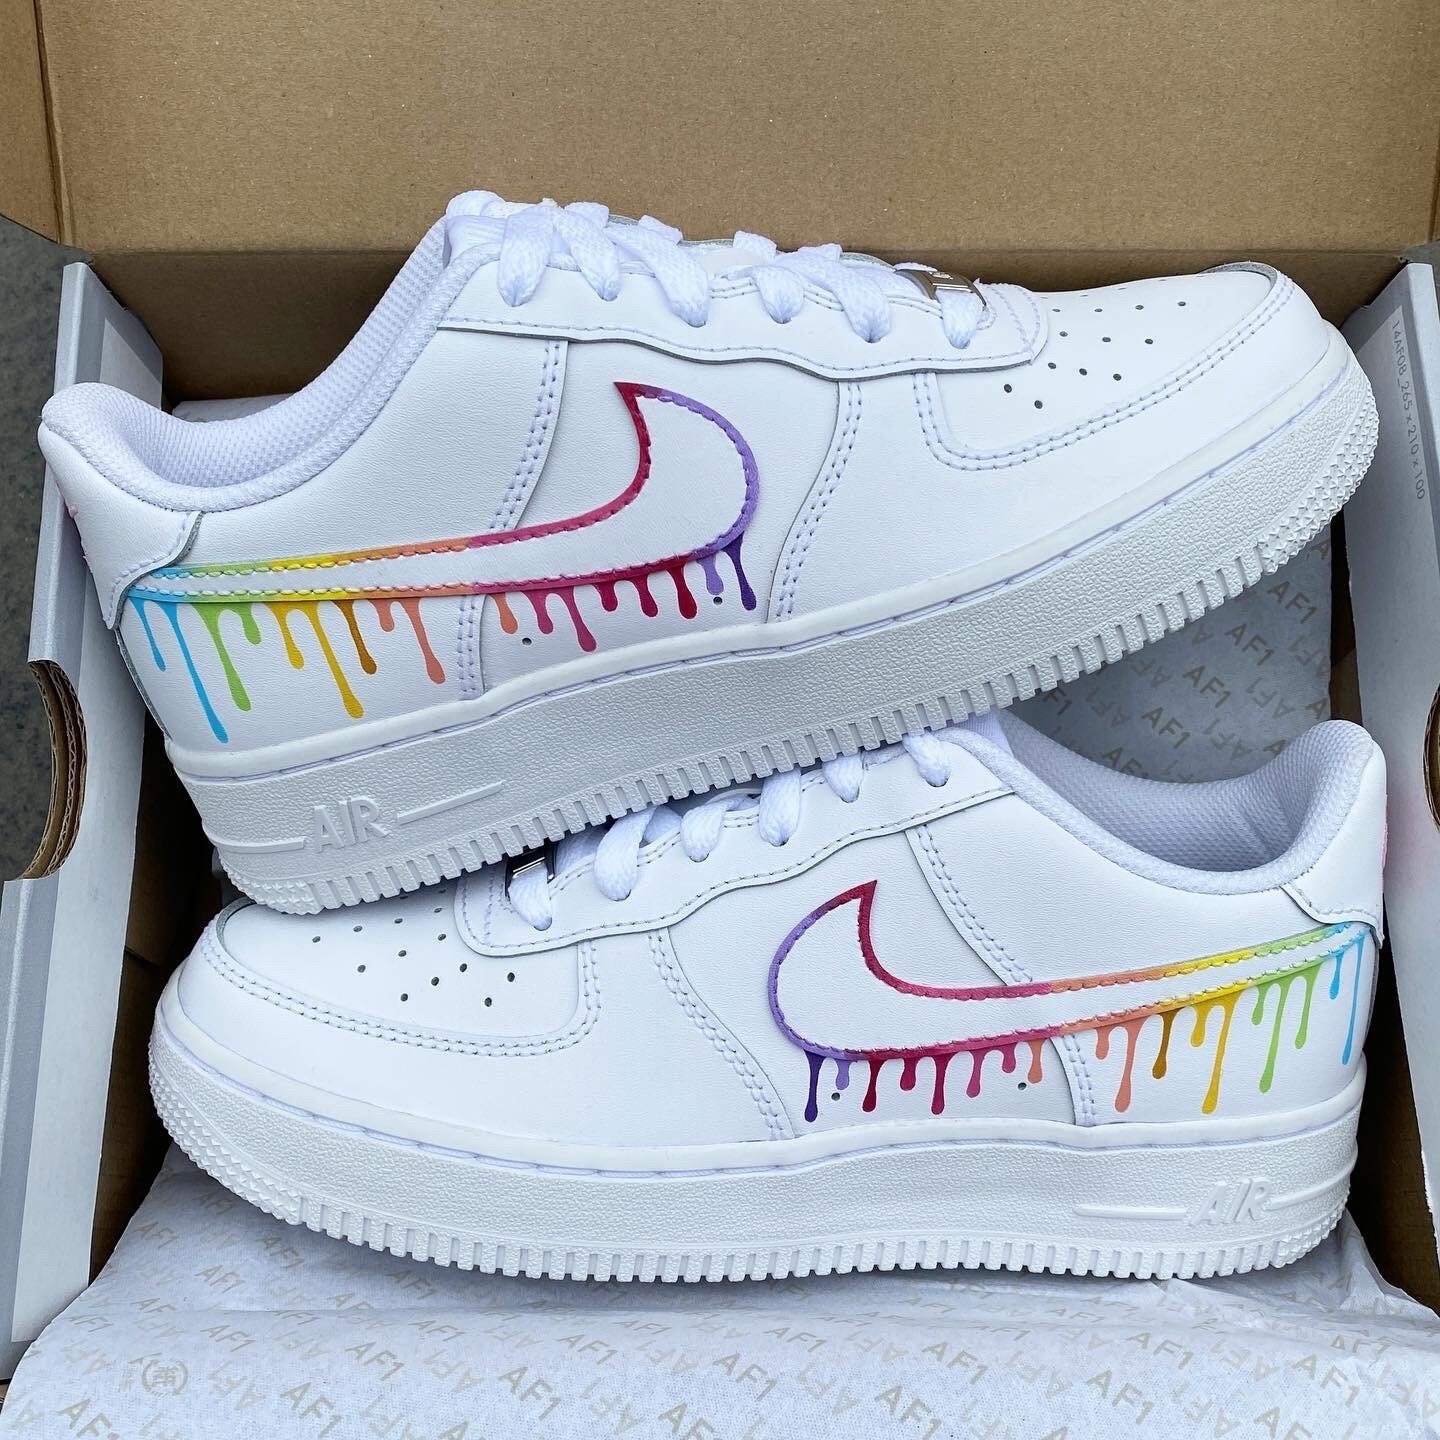 Nike Air Force Sneakers Rainbow Color - Etsy